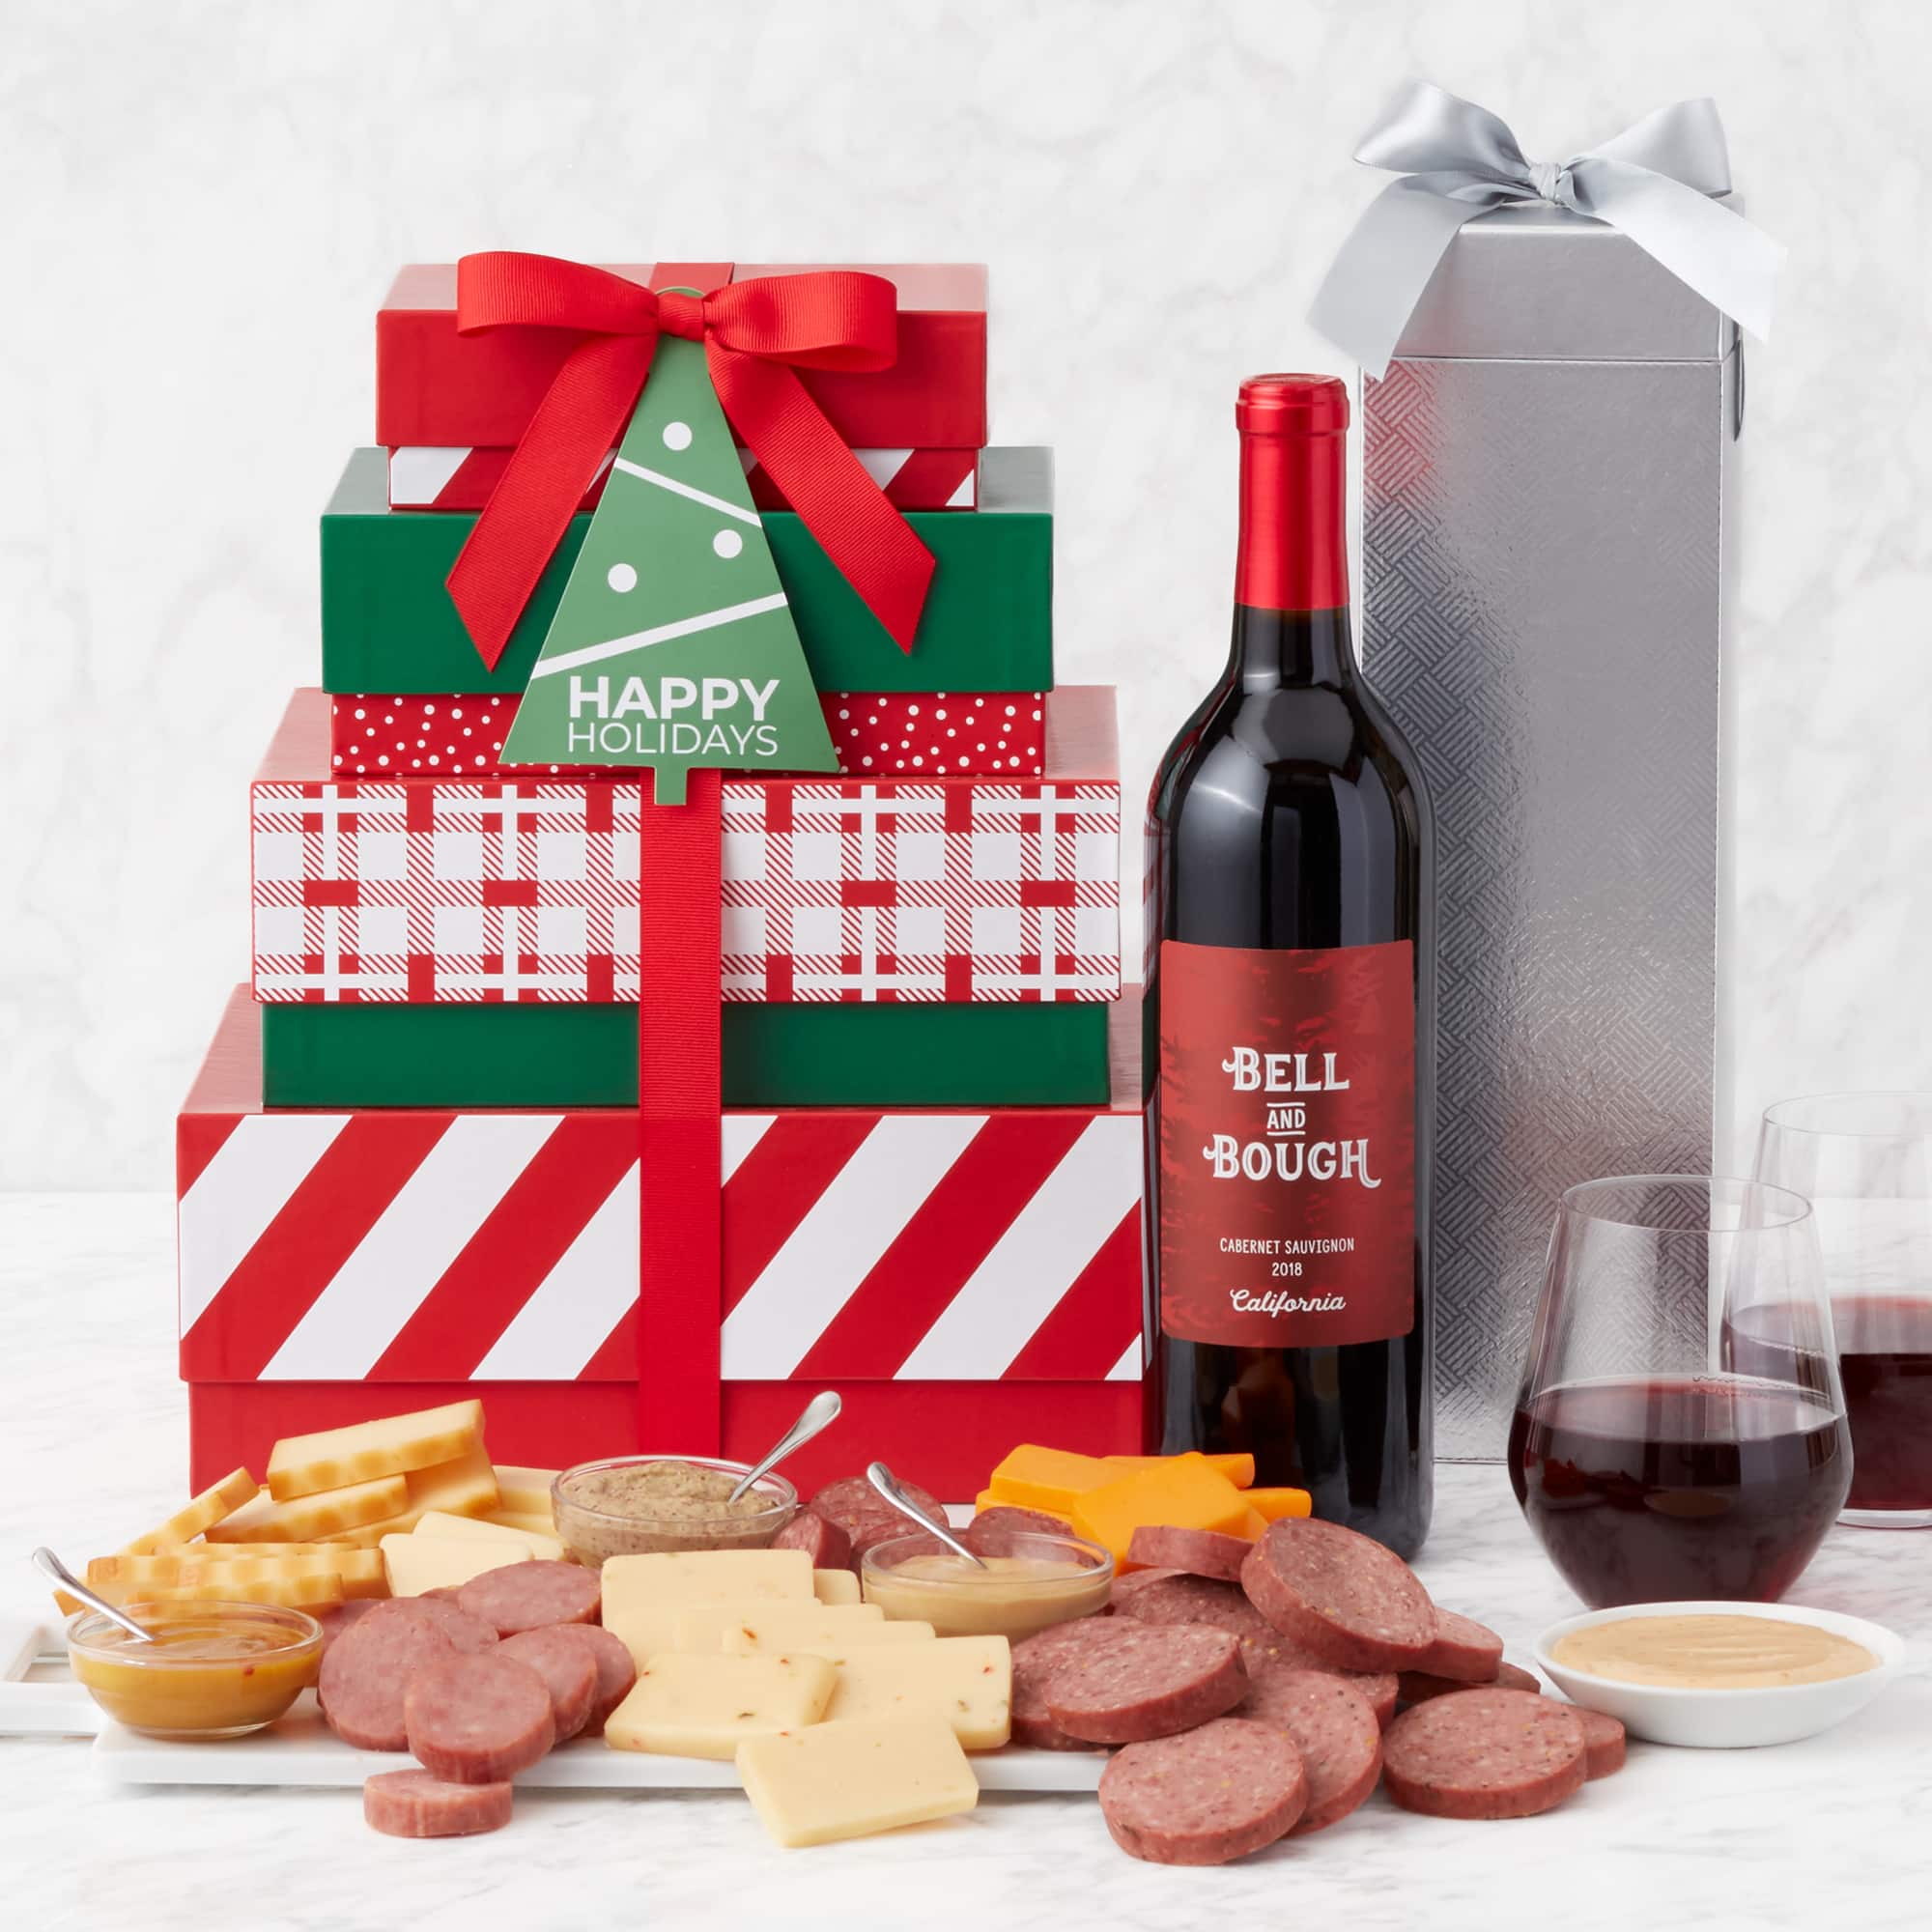 https://www.hickoryfarms.com/on/demandware.static/-/Sites-Web-Master-Catalog/default/dw00f9da1d/images/products/holiday-gourmet-meat-cheese-gift-tower-wine-003925-3.jpg